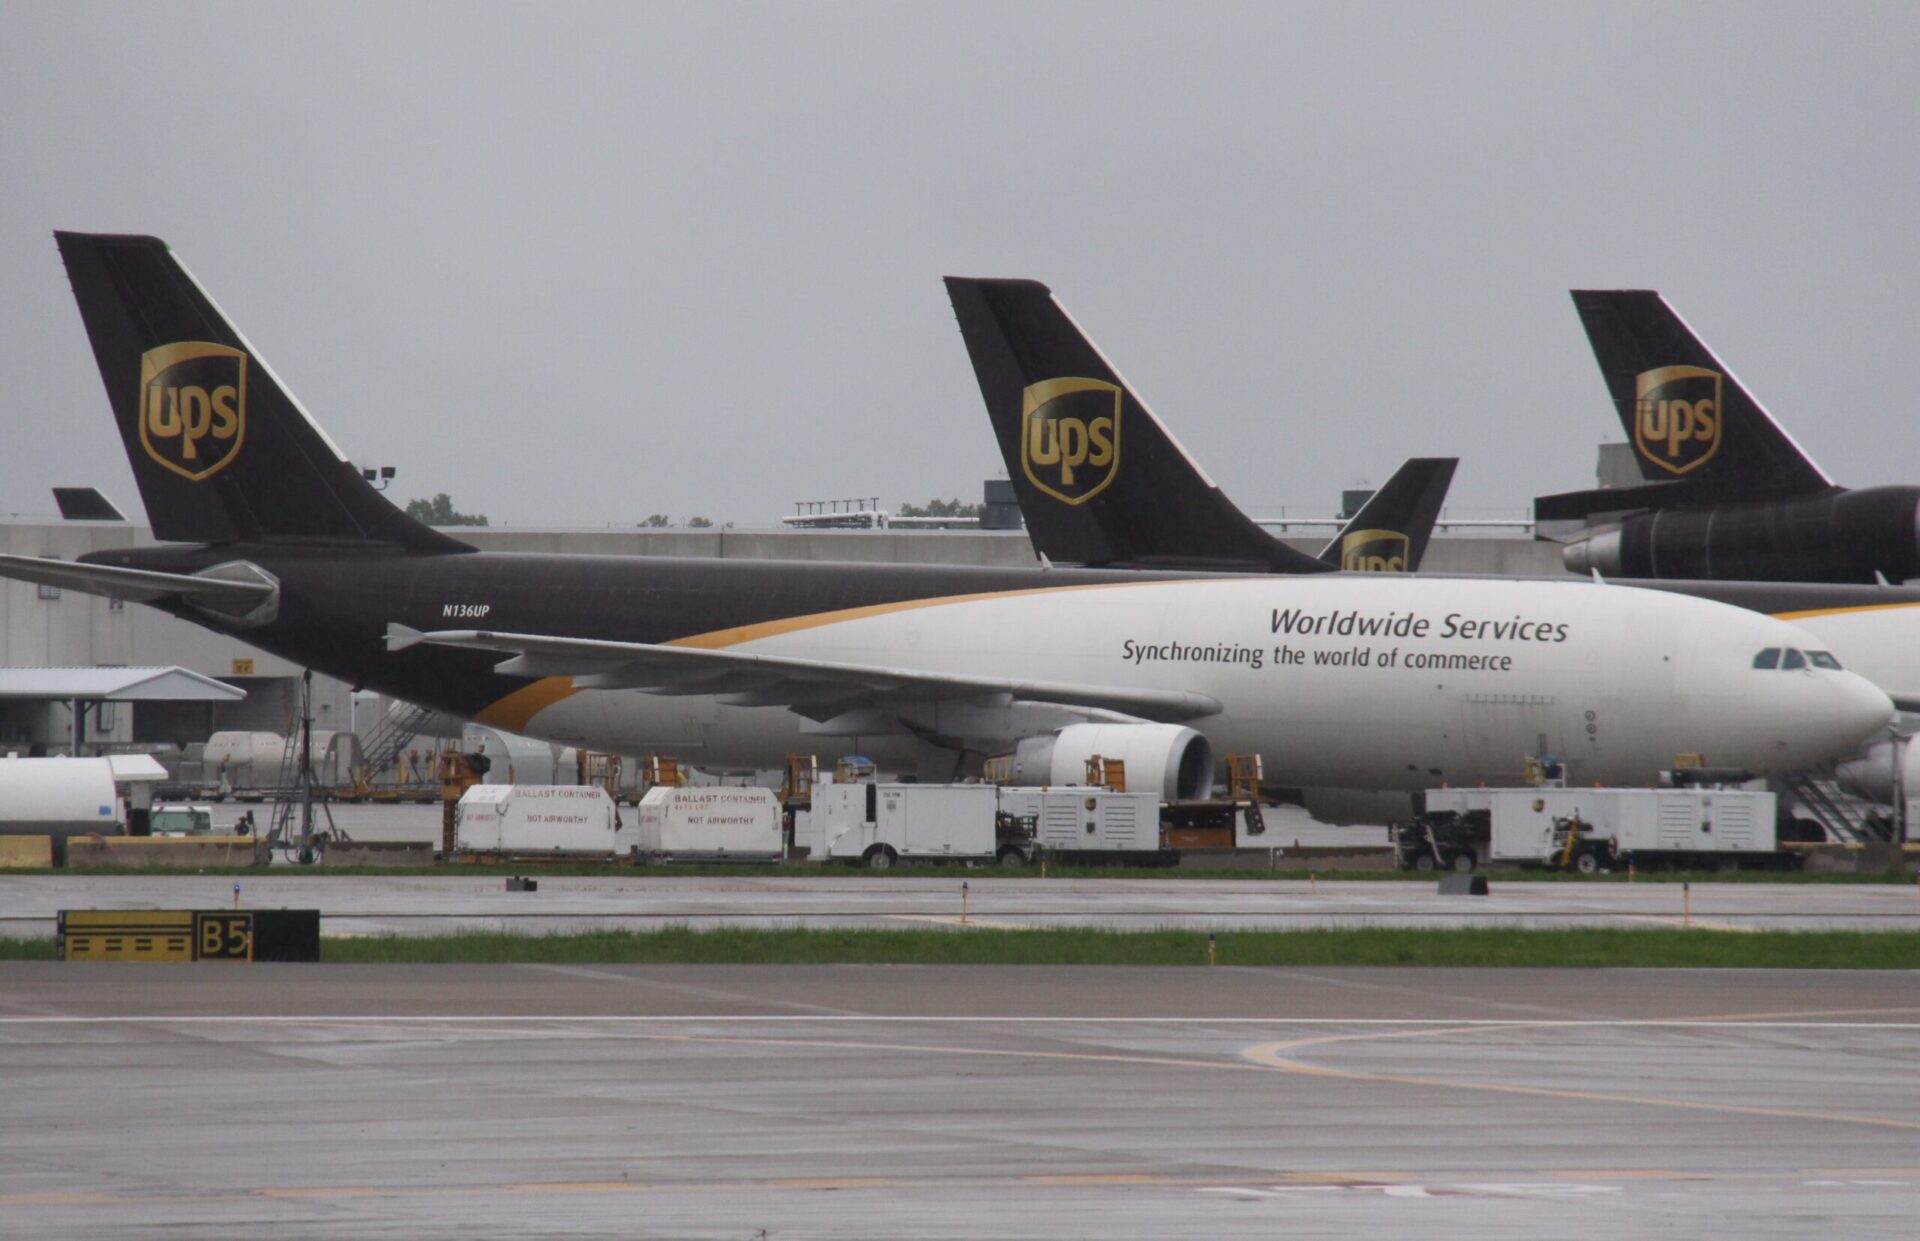 Brand | United Parcel Service (UPS) – The Glorious History of Over 100 Years